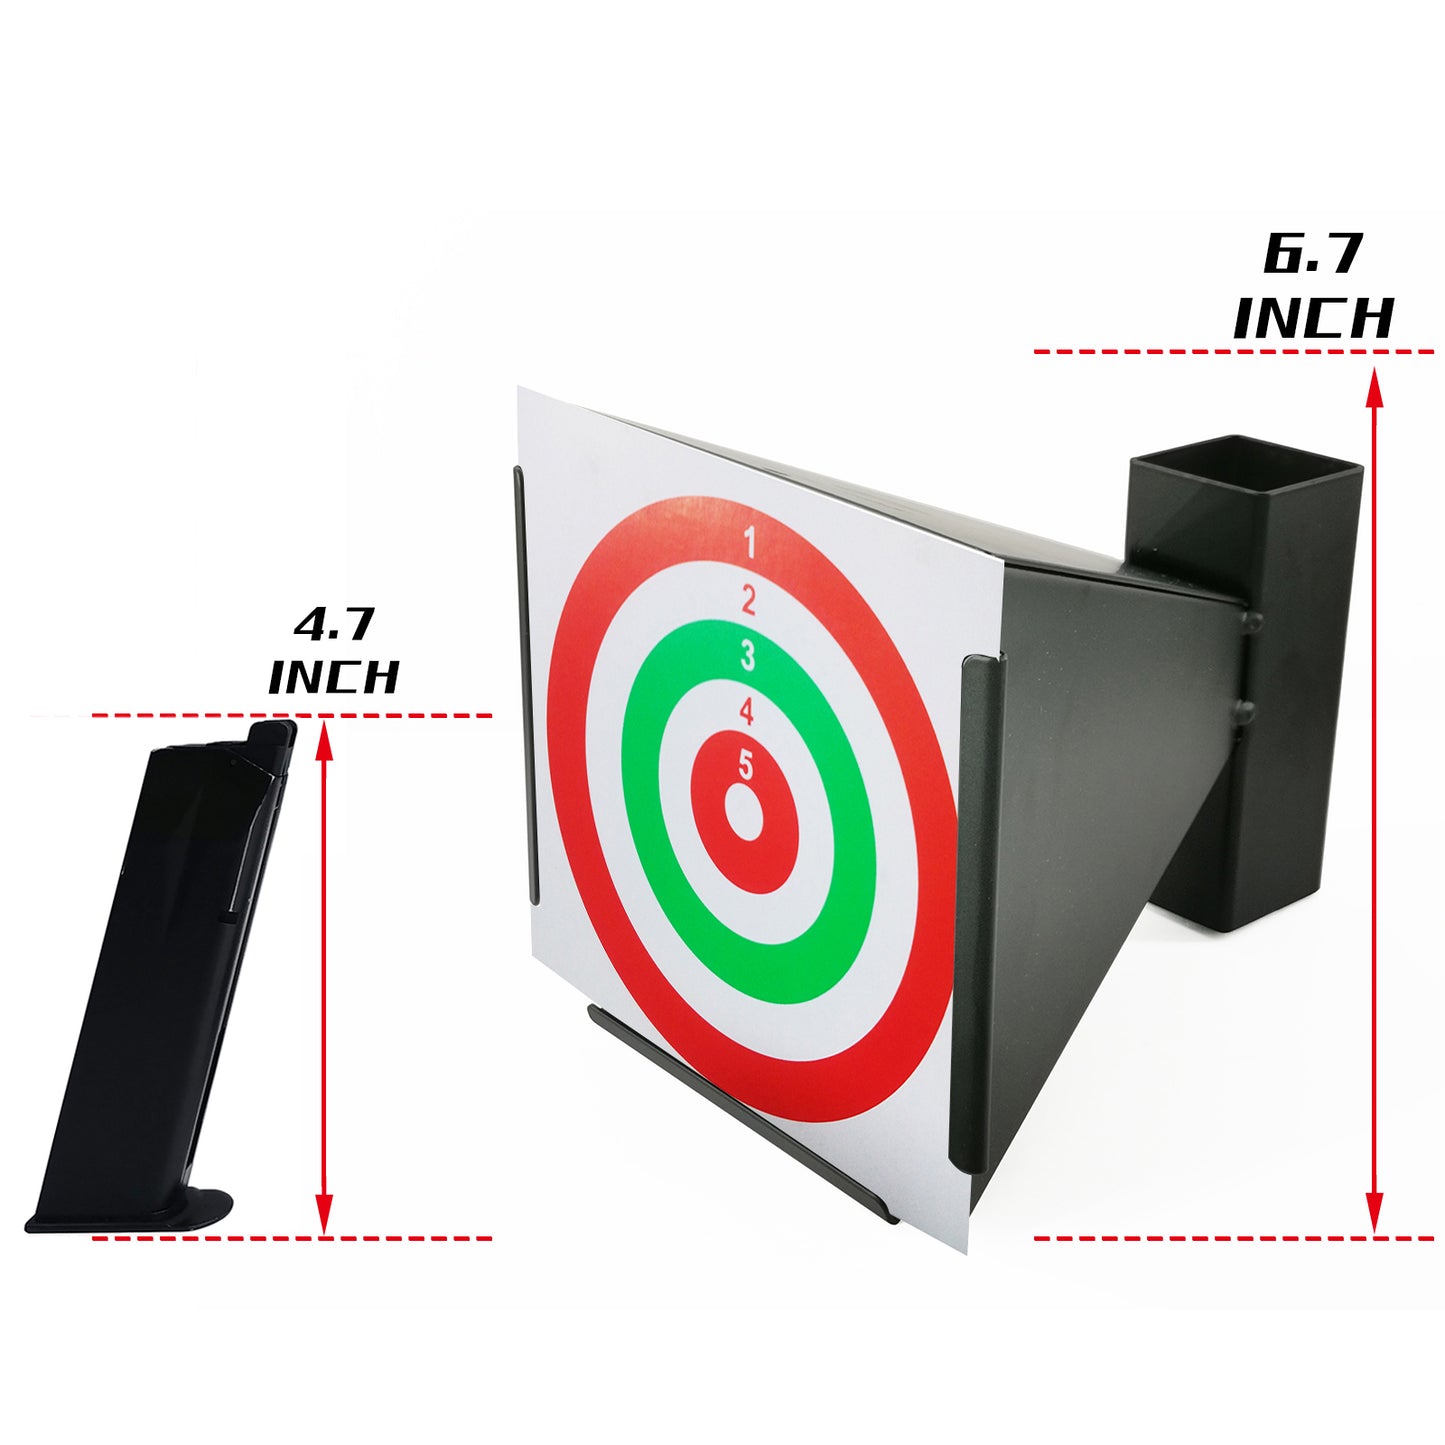 Atflbox 6.7 Inch BB Gun Trap with 20pcs Paper Target Bullet Catcher Shooting Target for Airsoft, Pellet, Rifle